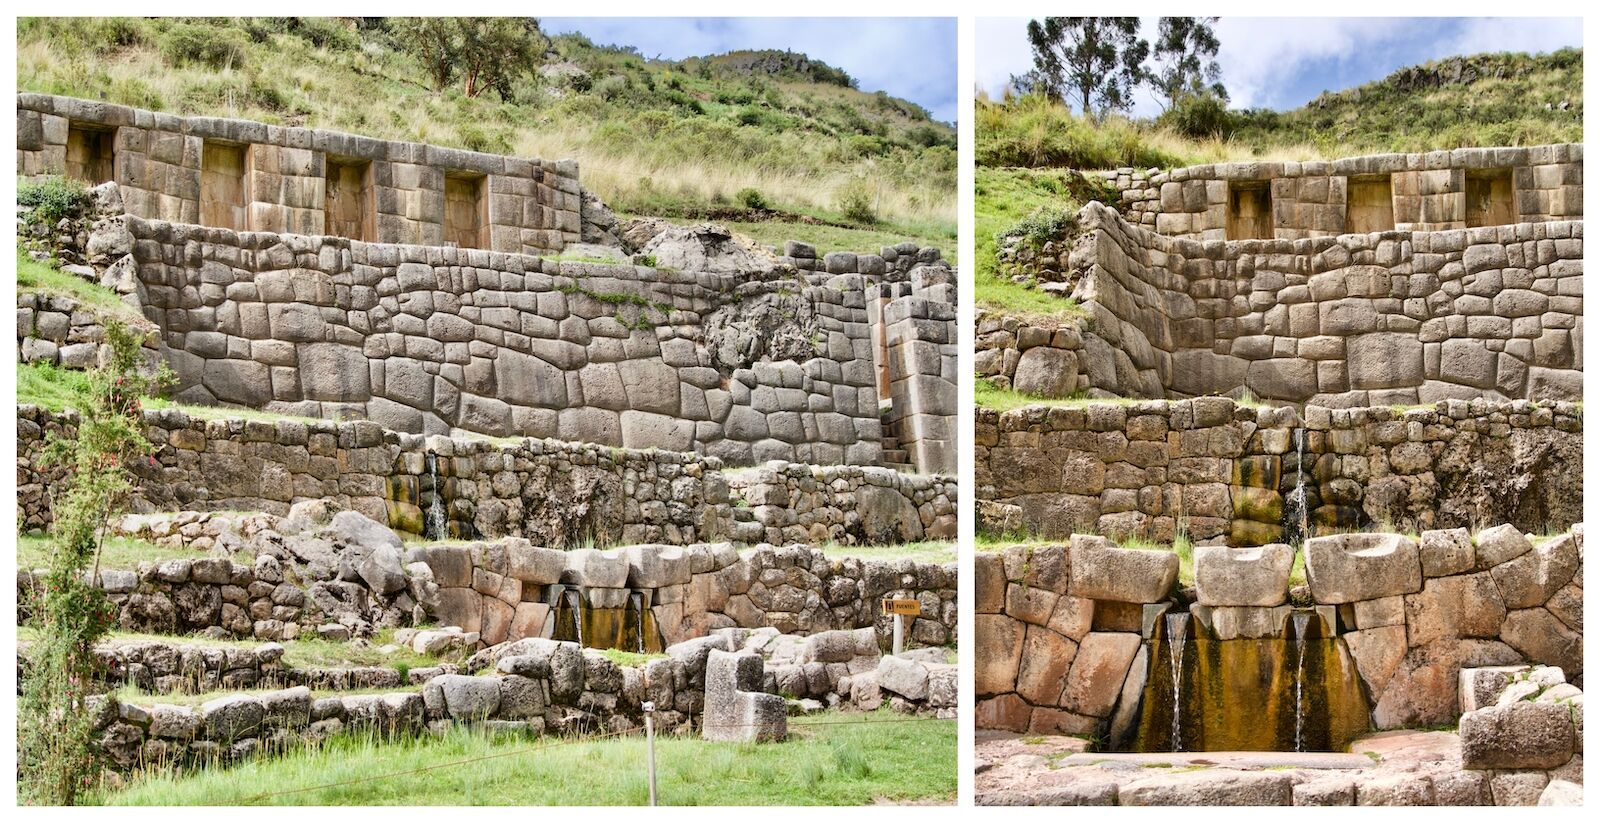 Cusco archeological site of Tambomachay